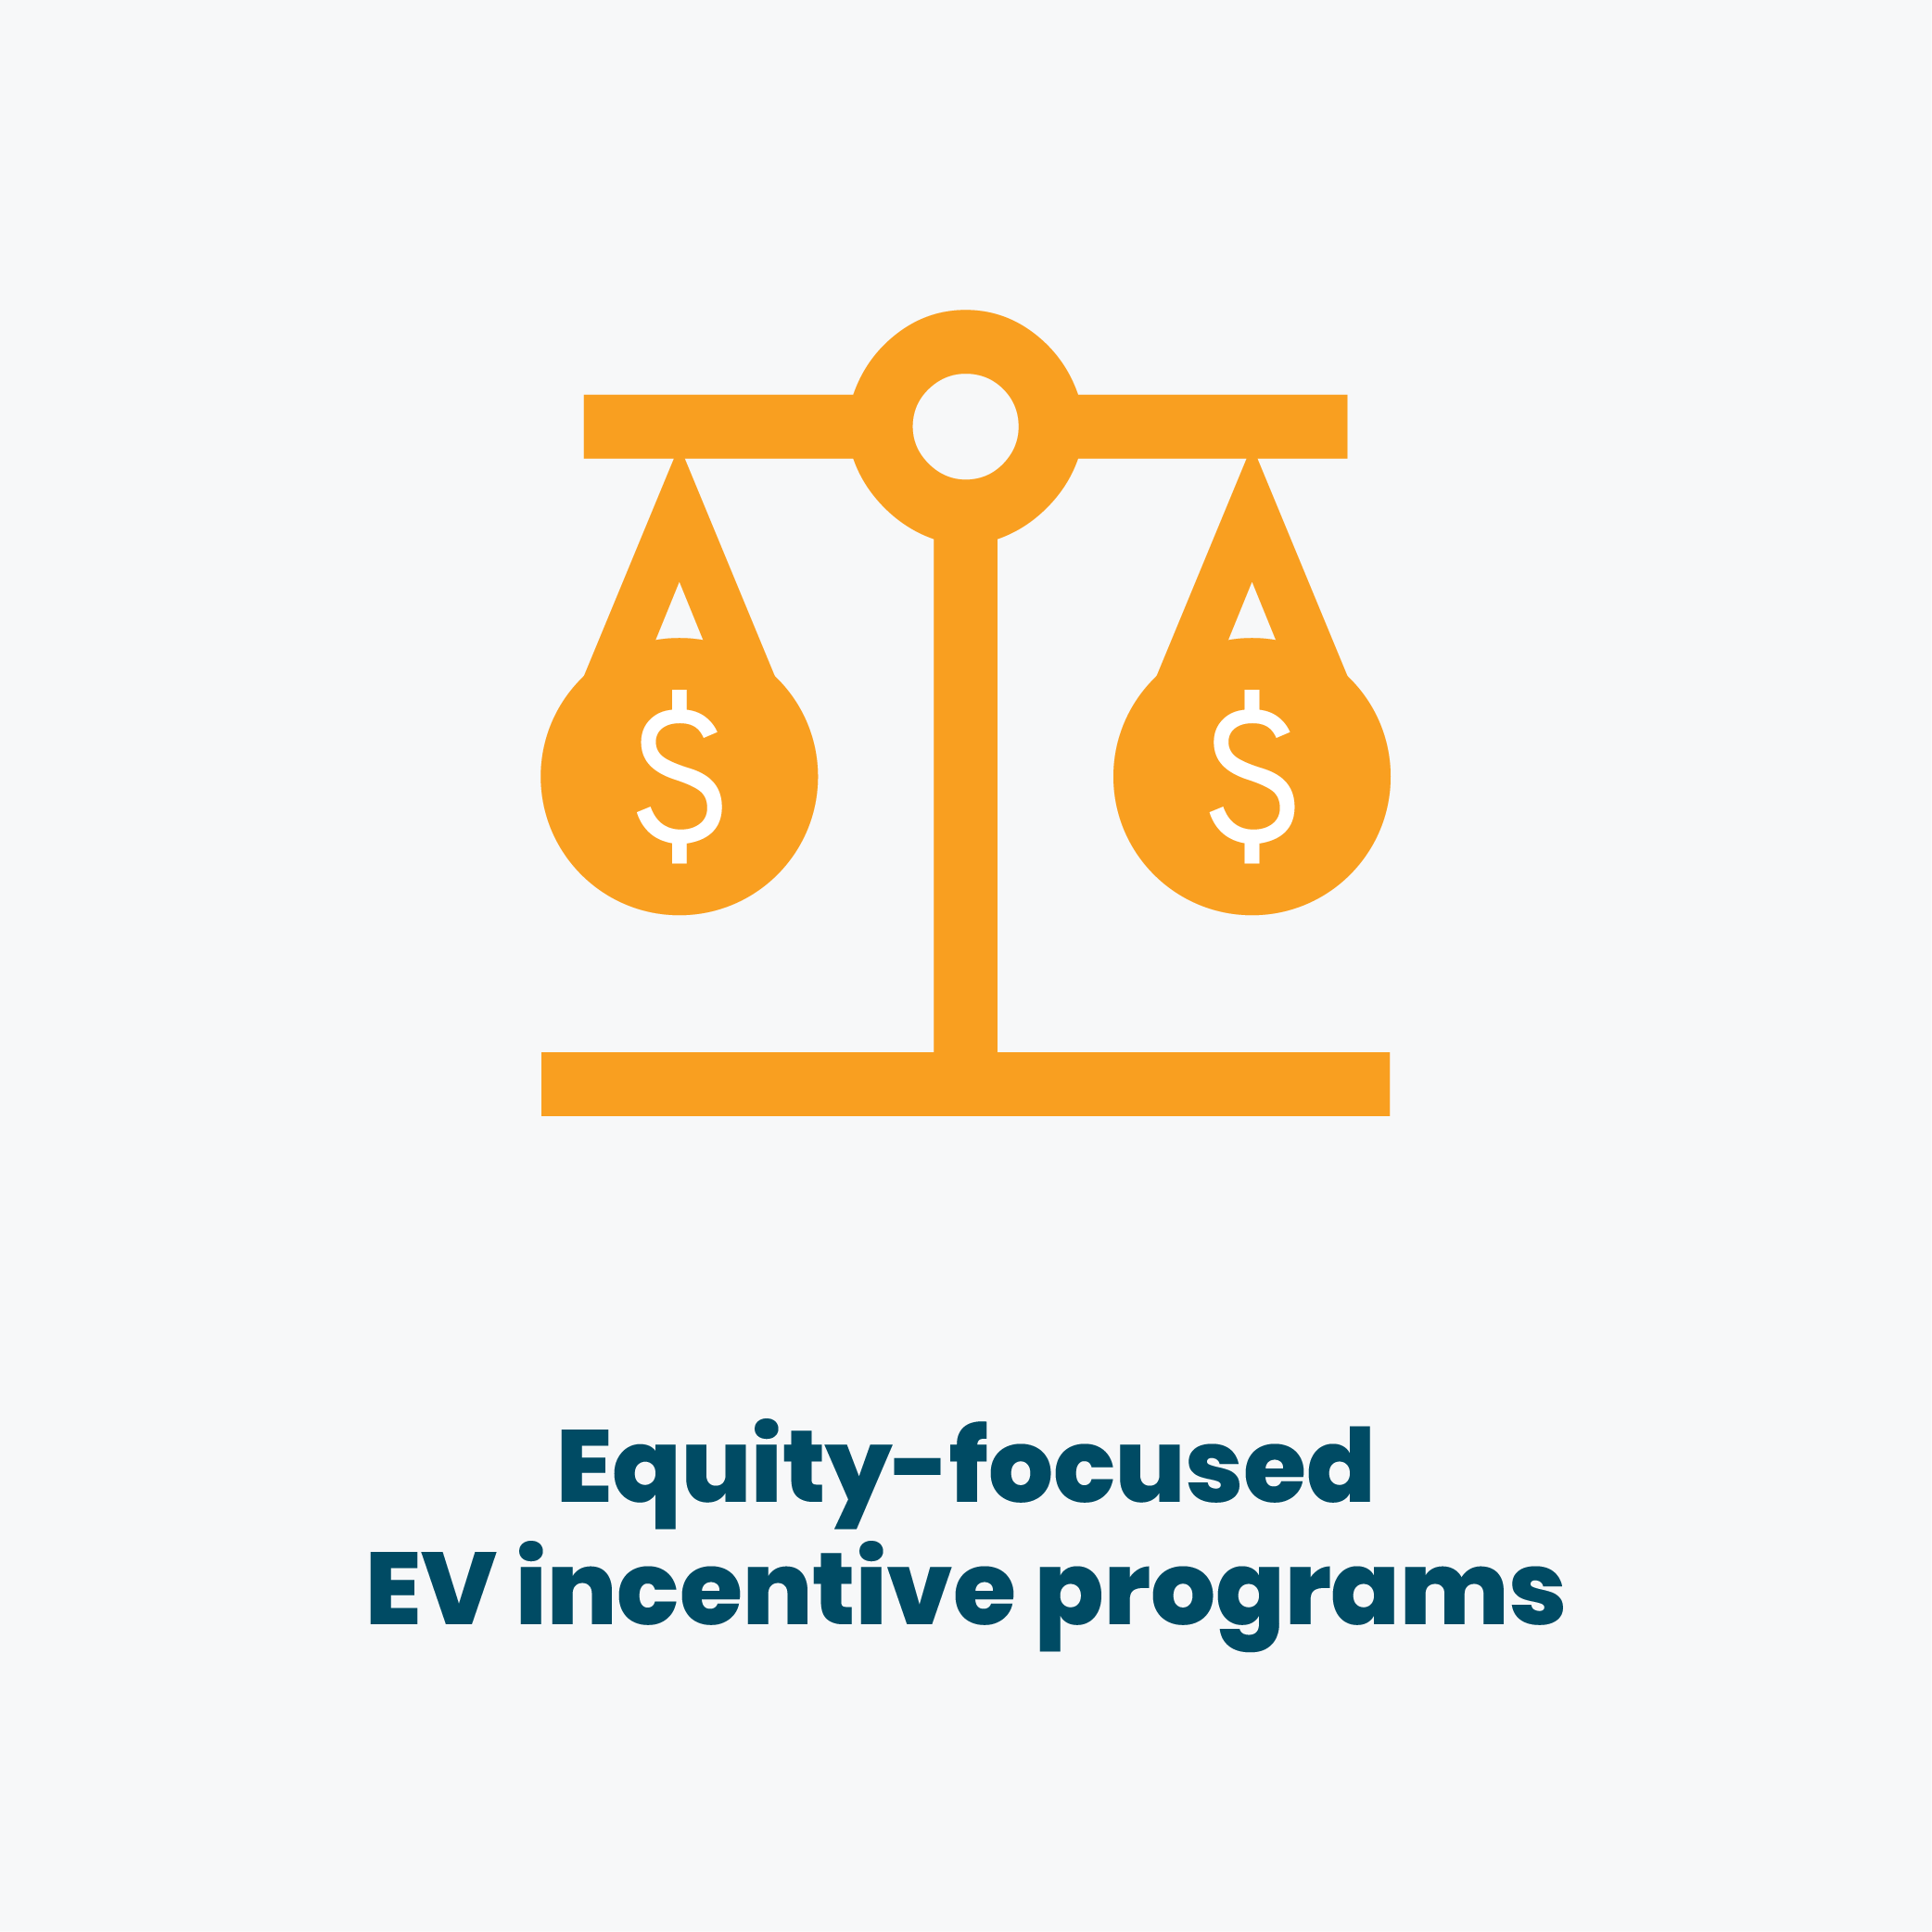 Scale icon to illustrate equitable EV incentives.